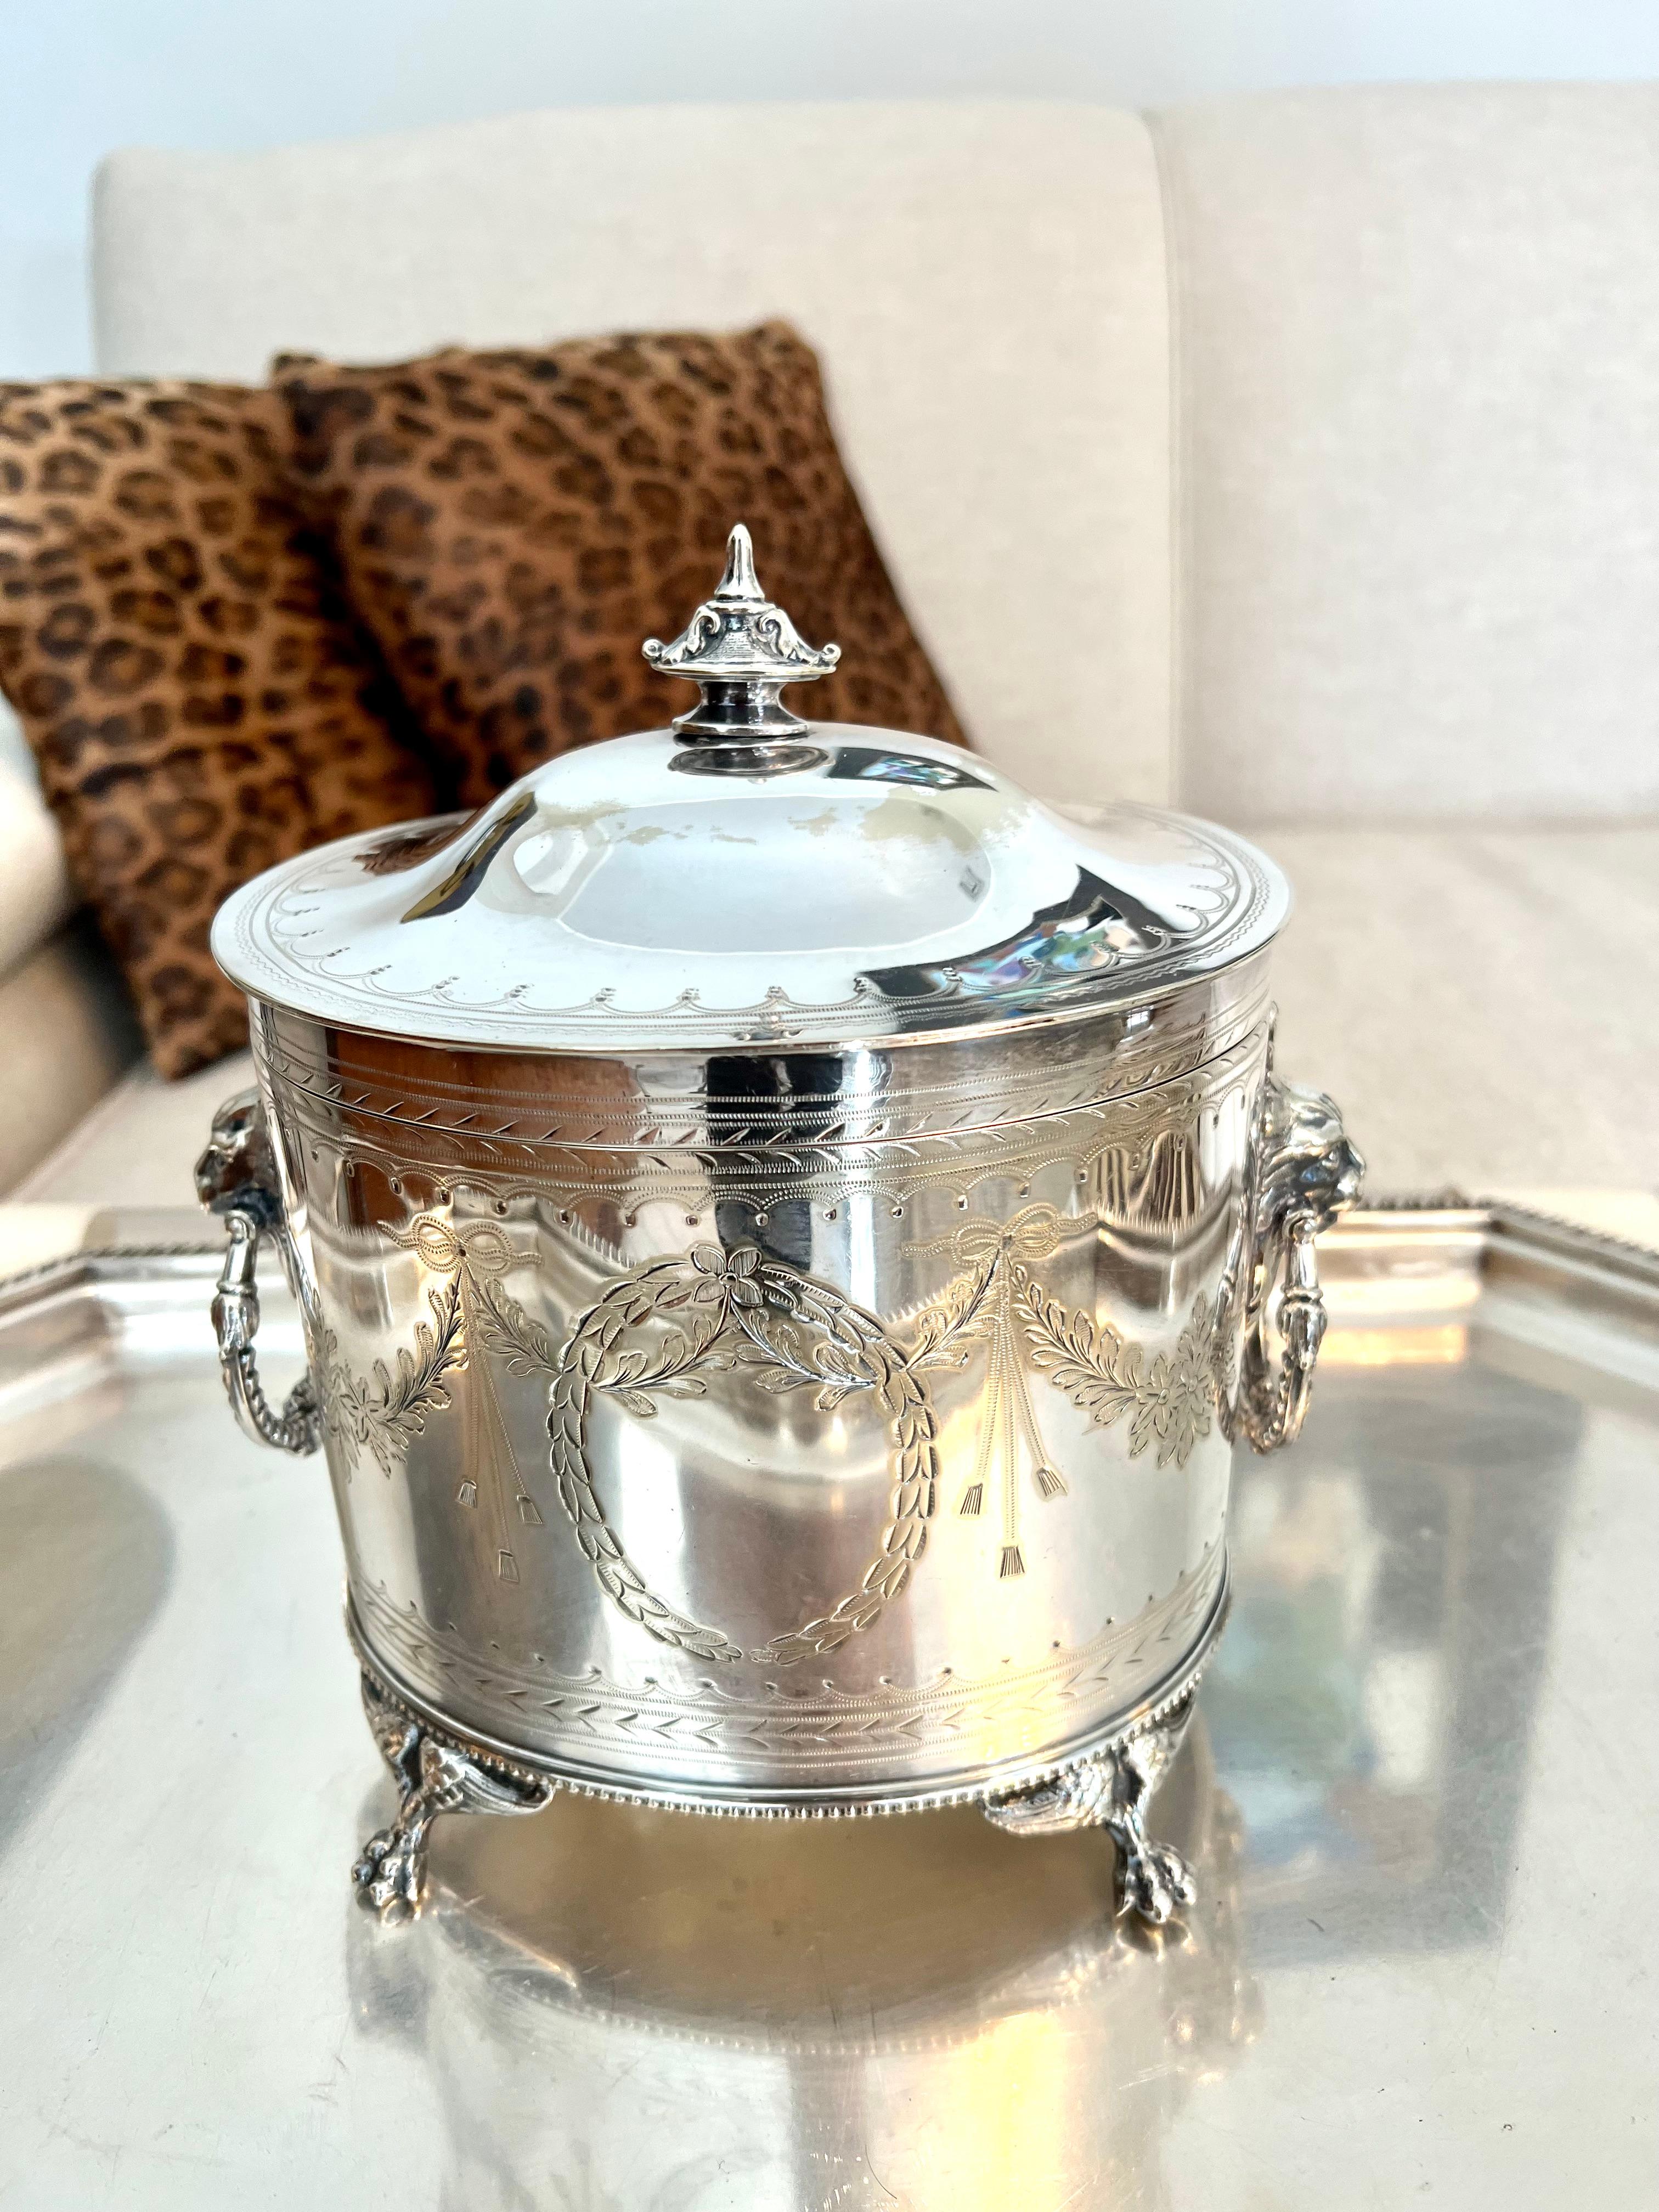 English Silver Plate Tea Caddy with Lion and Ring Handles For Sale 3